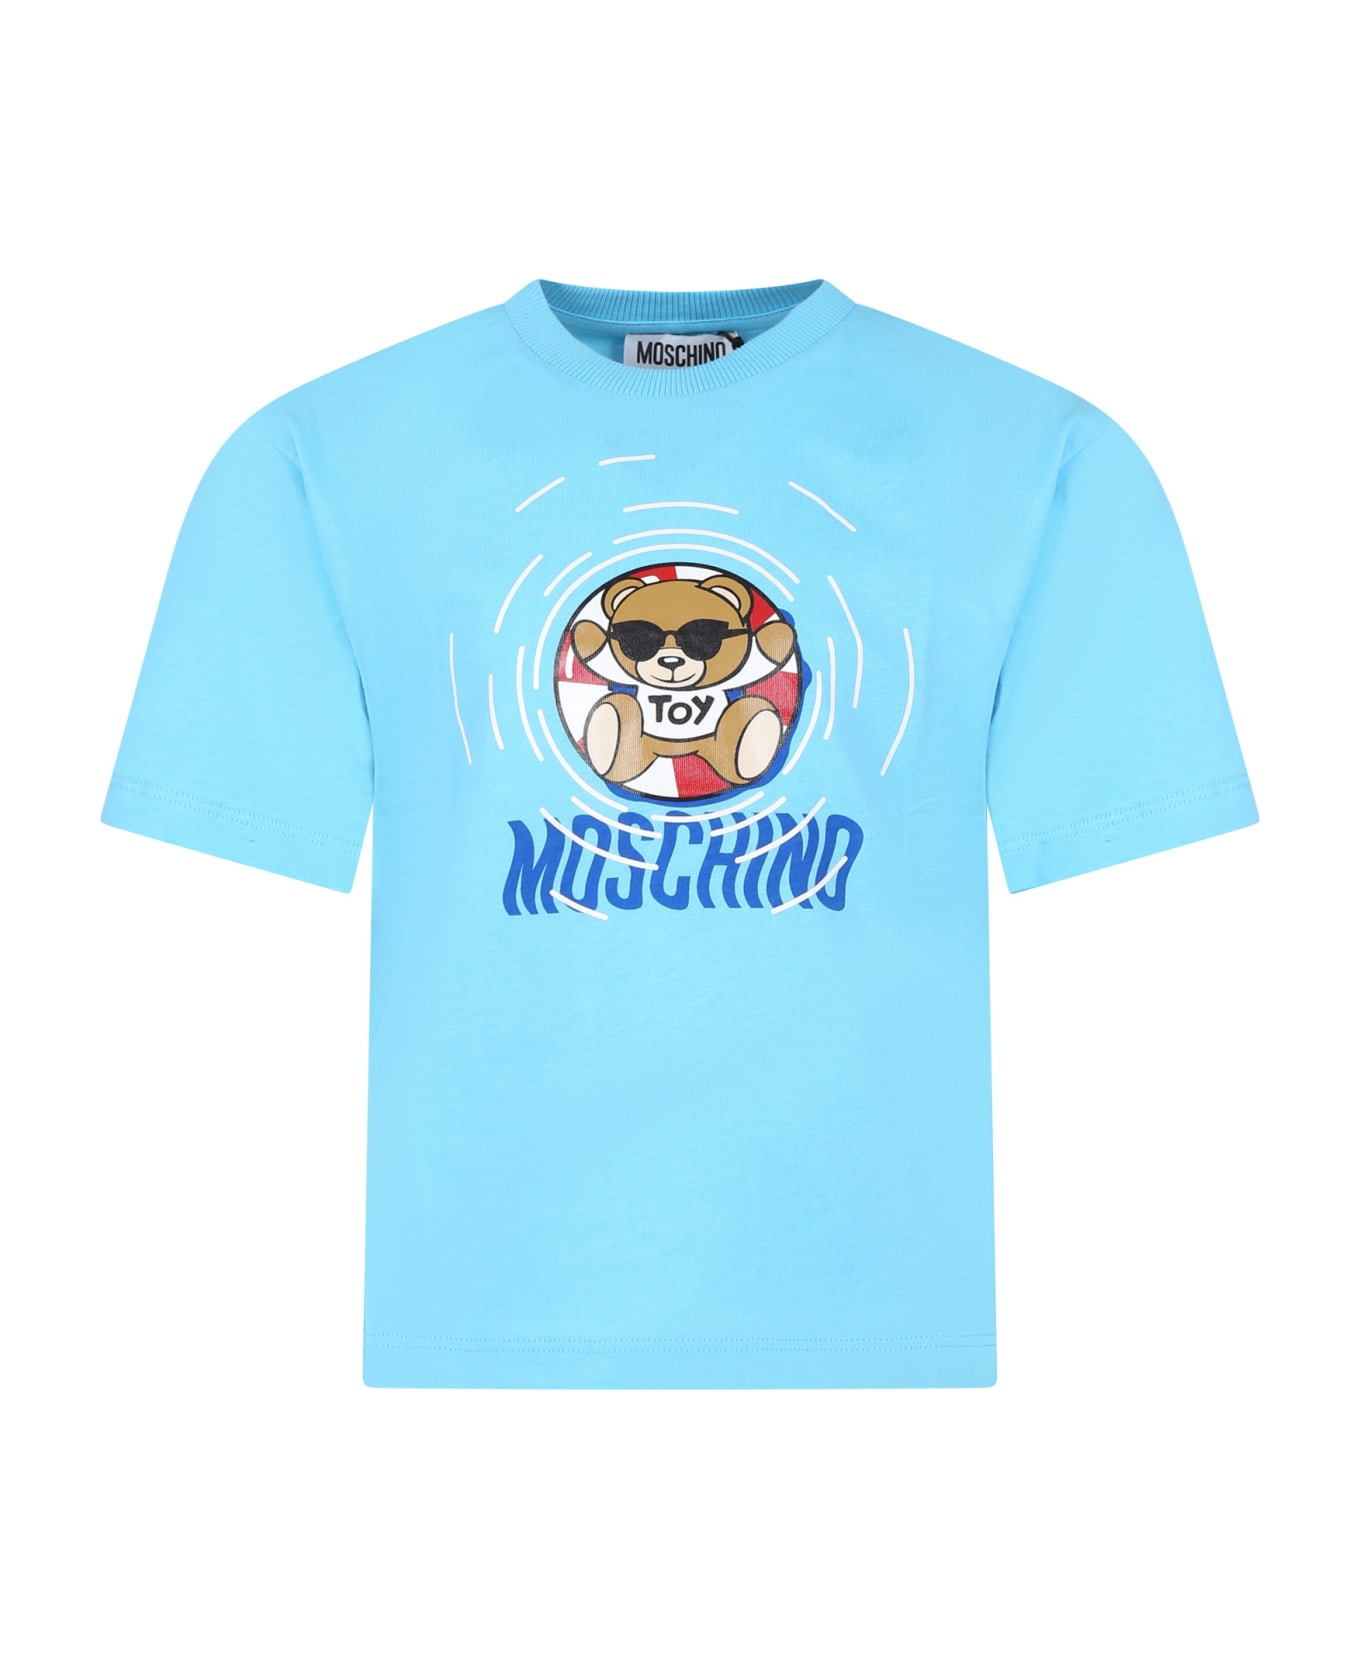 Moschino Light Blue T-shirt For Boy With Multicolored Print And Teddy Bear - Blu Tシャツ＆ポロシャツ